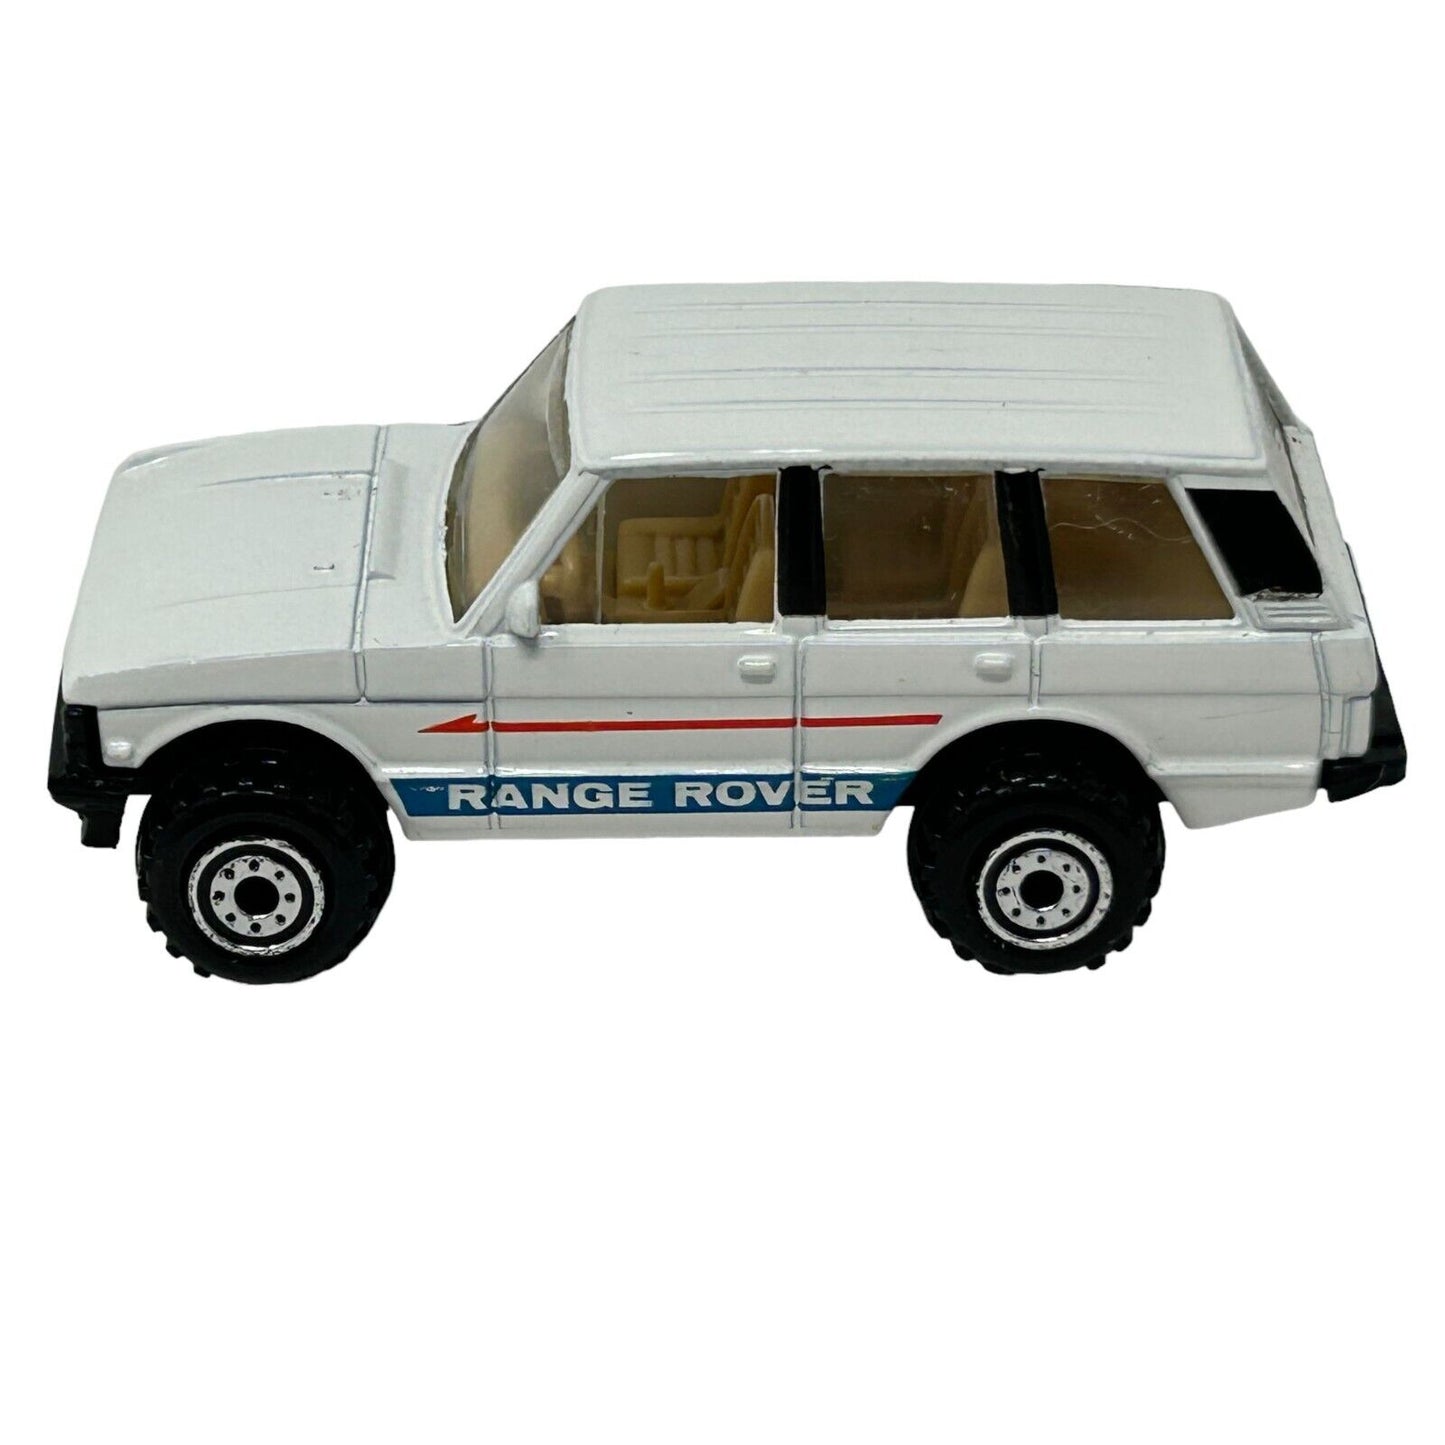 Range Rover Hot Wheels Collectible Diecast Car White Vintage 90s Toy Vehicle